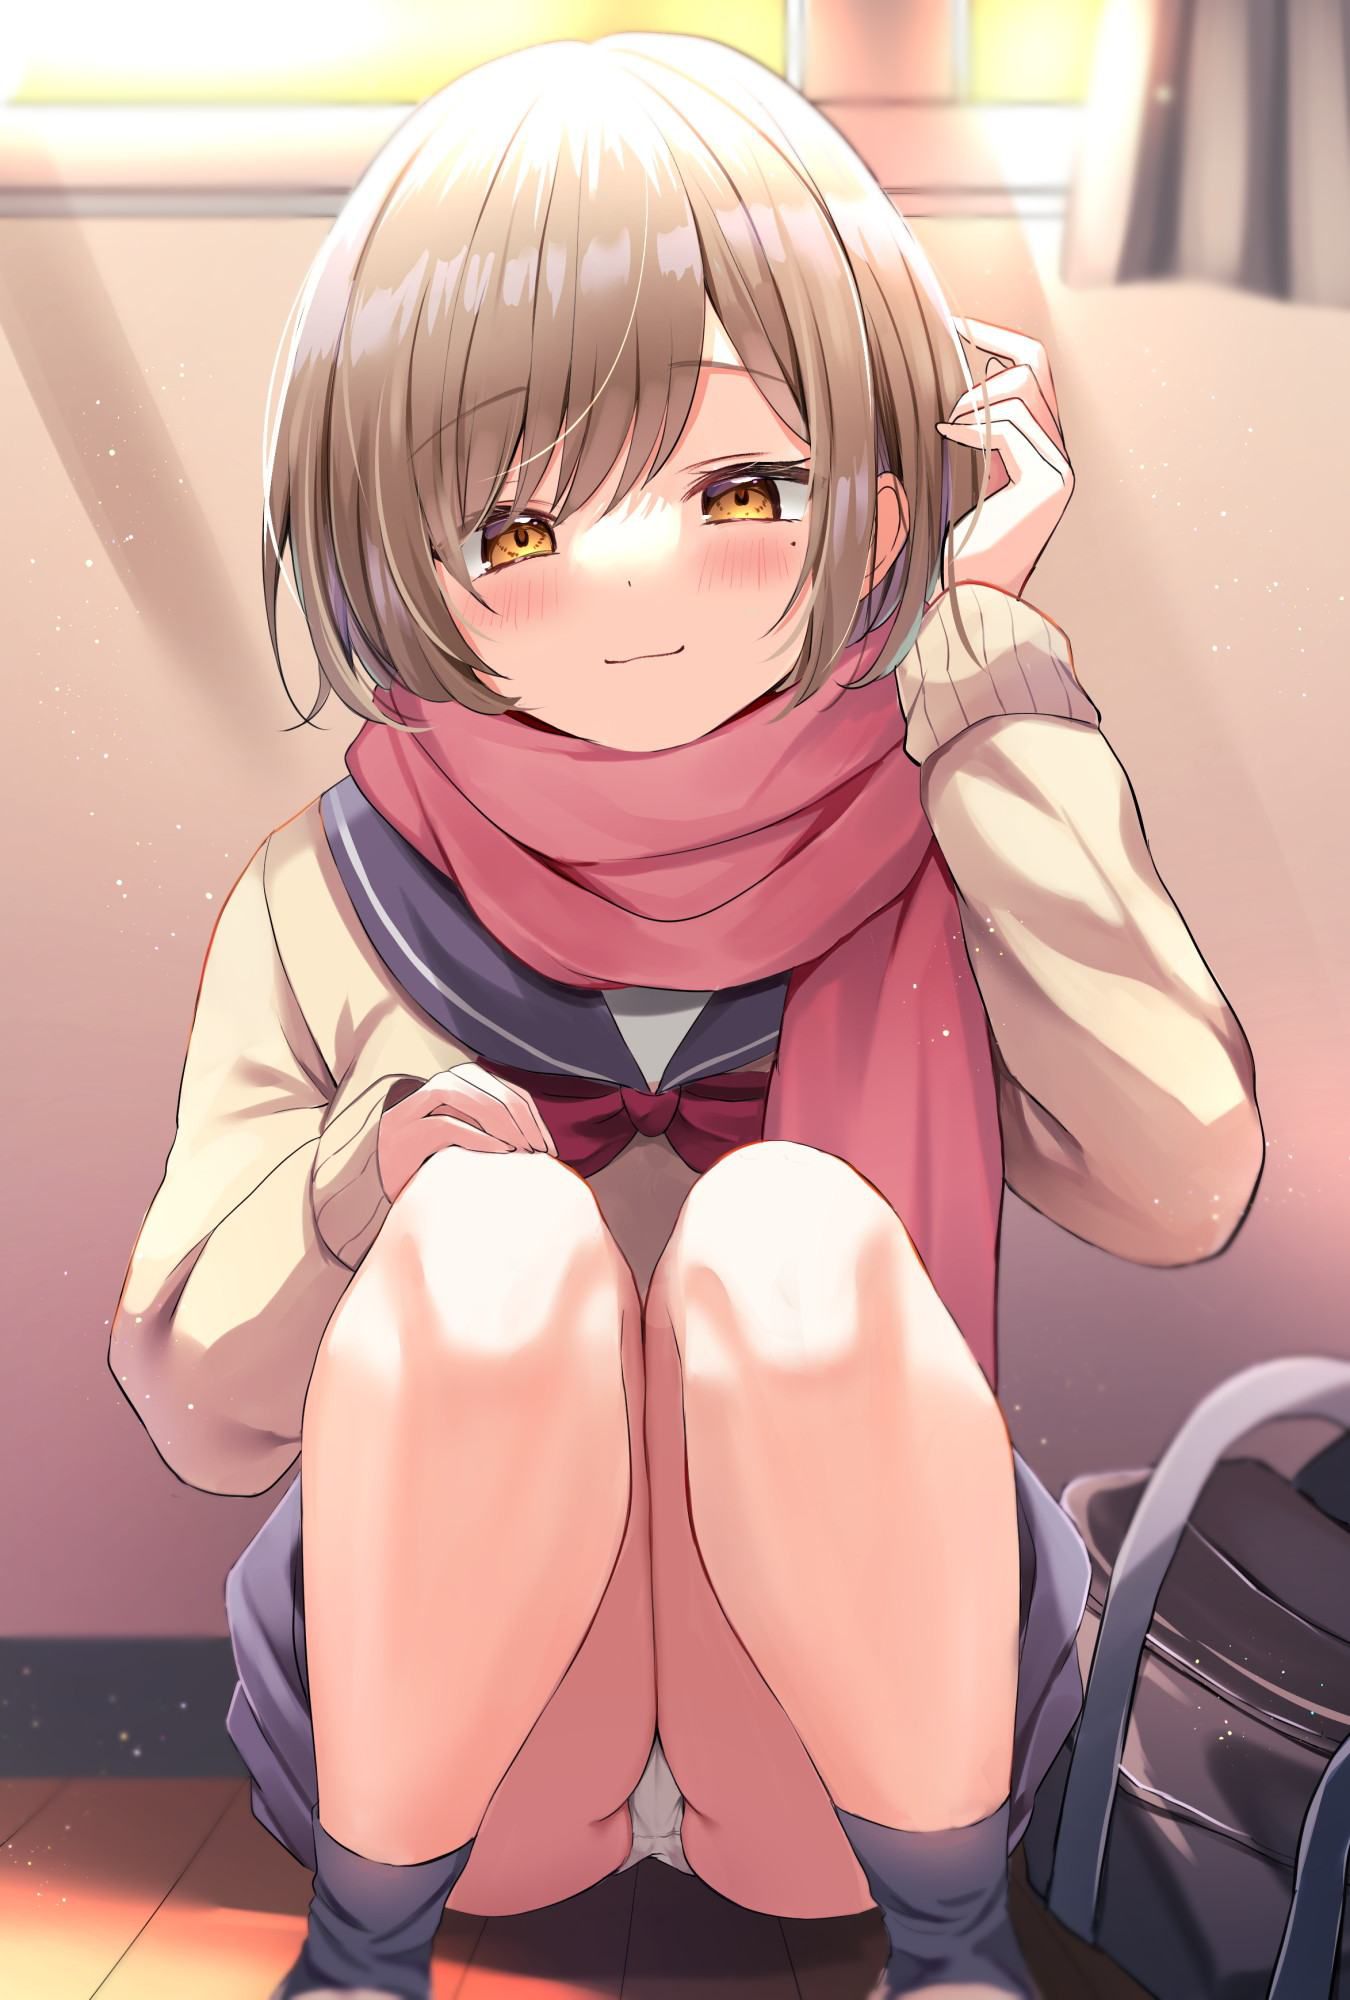 "Where are you looking~?" A soft-looking defenseless crotch image ♪ of a girl squatting with her eyes 23